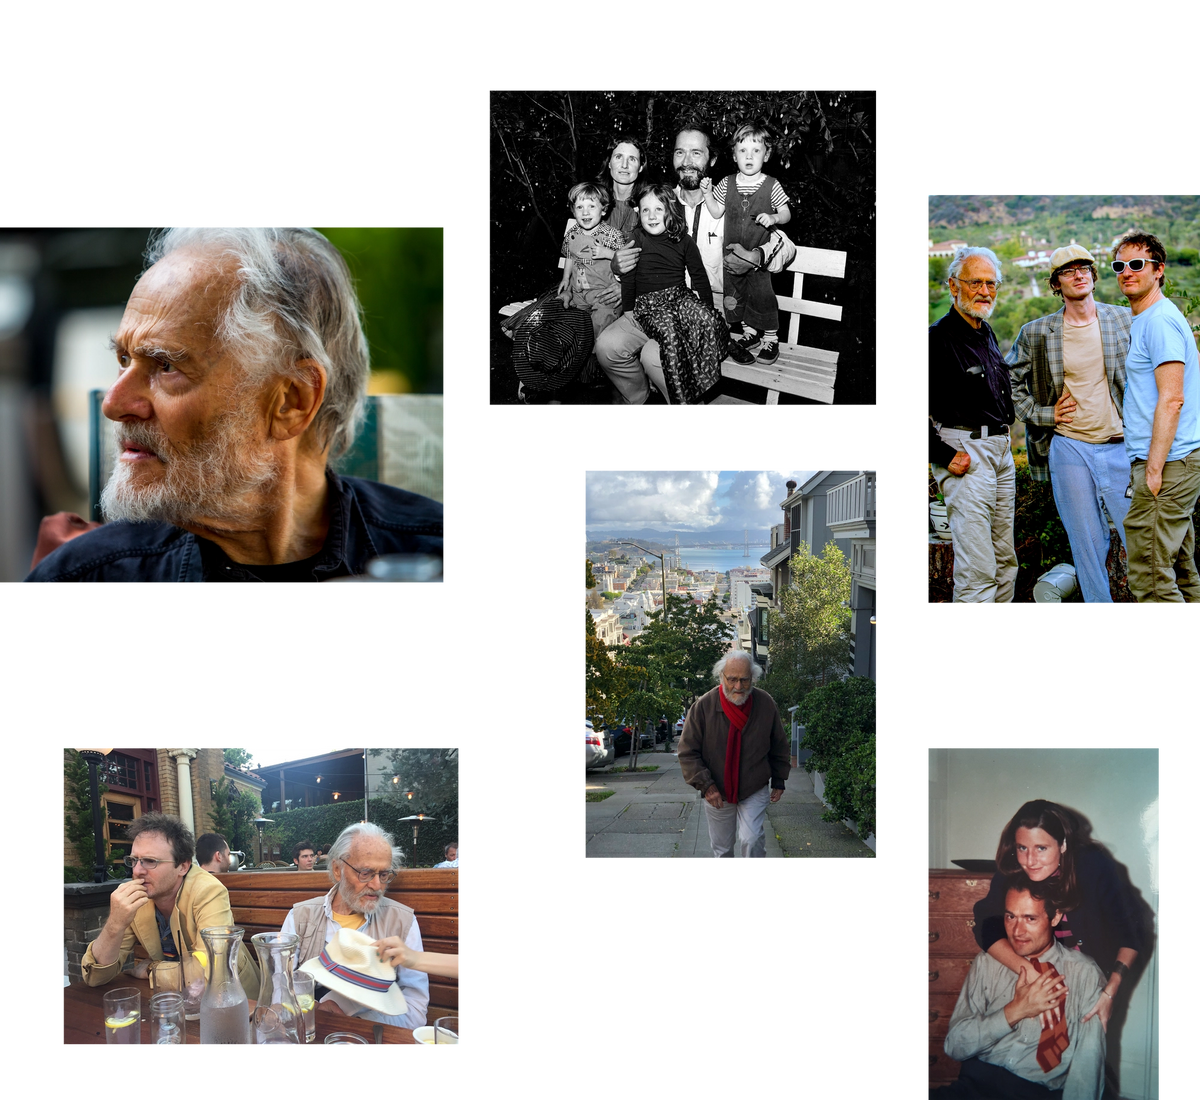 Clockwise from top left: Herb; family; Herb, Ethan, and Ari; Herb and Melissa Gold; Herb in San Francisco; Ari and Herb